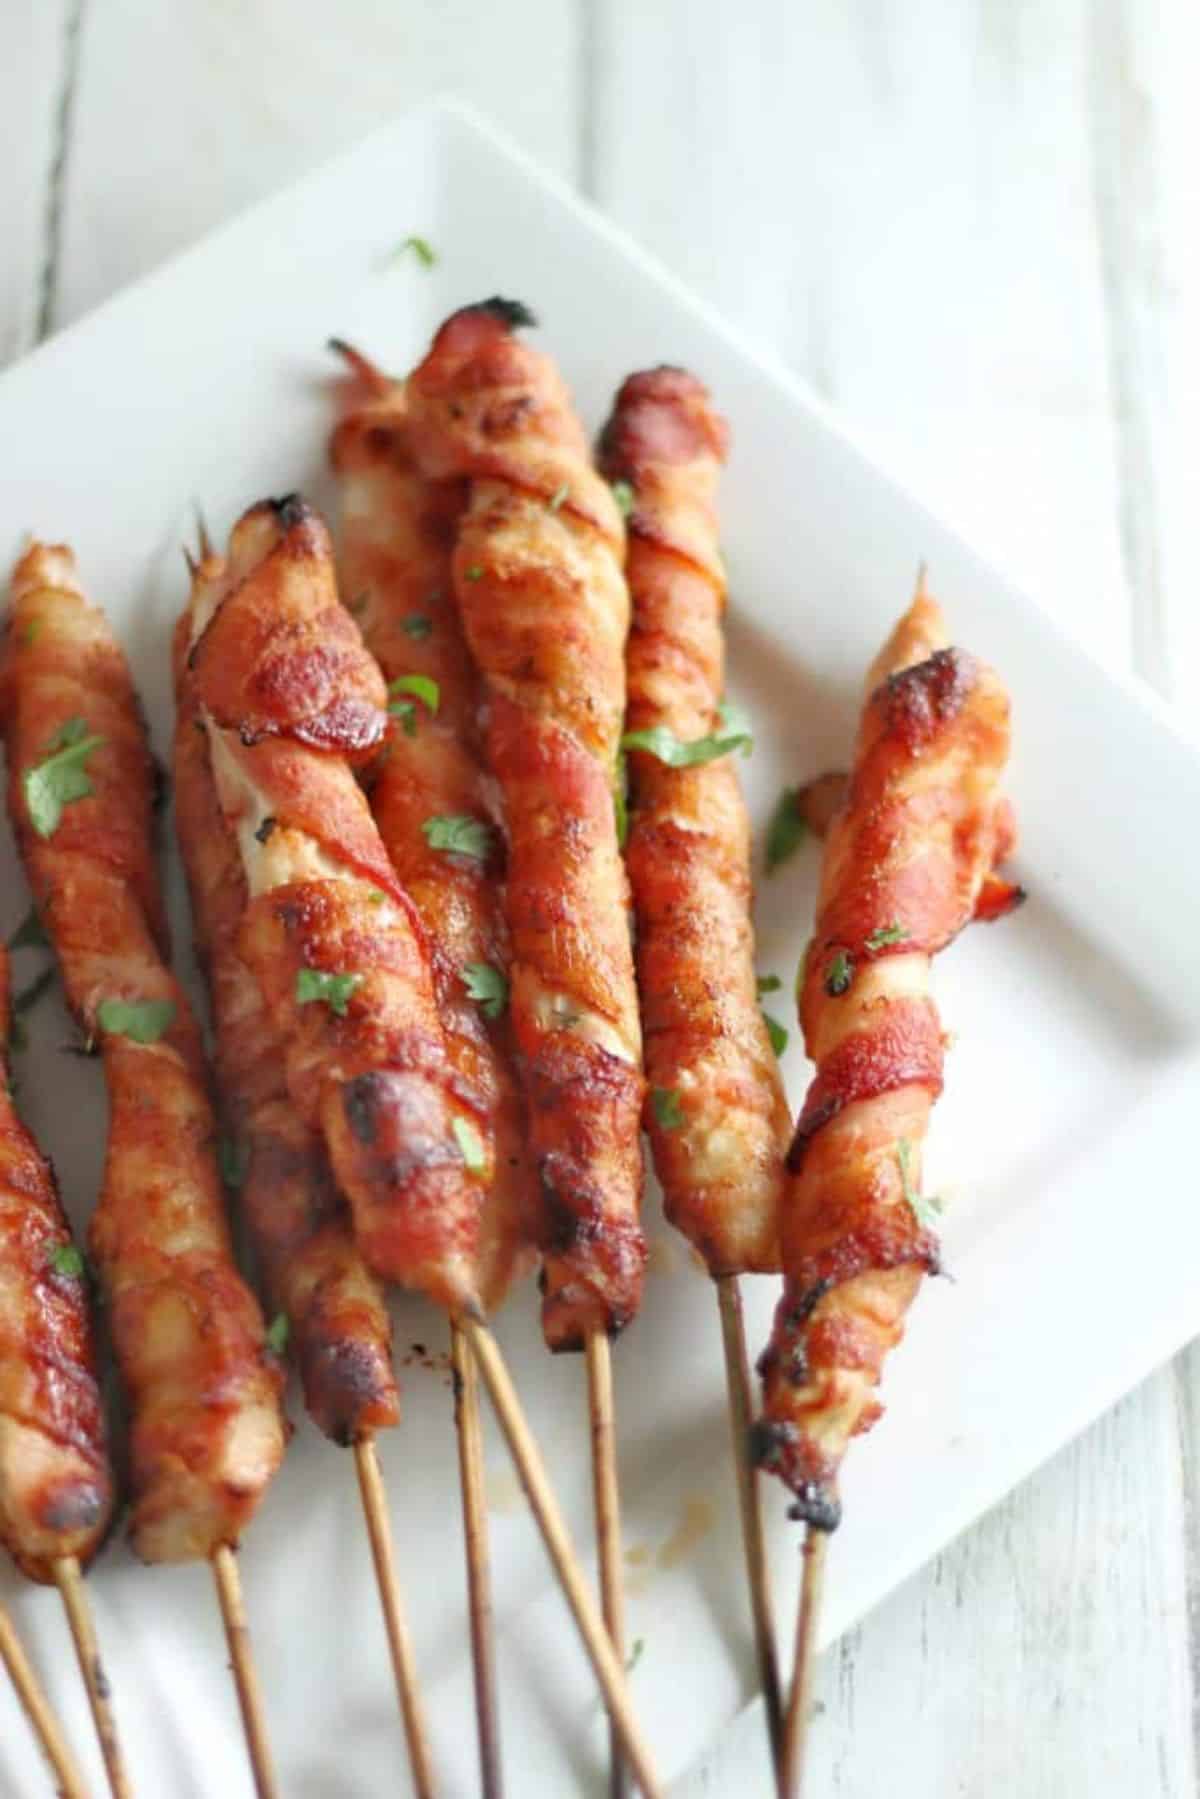 Scrumptious Bacon Wrapped Chicken Skewers on a white plate.